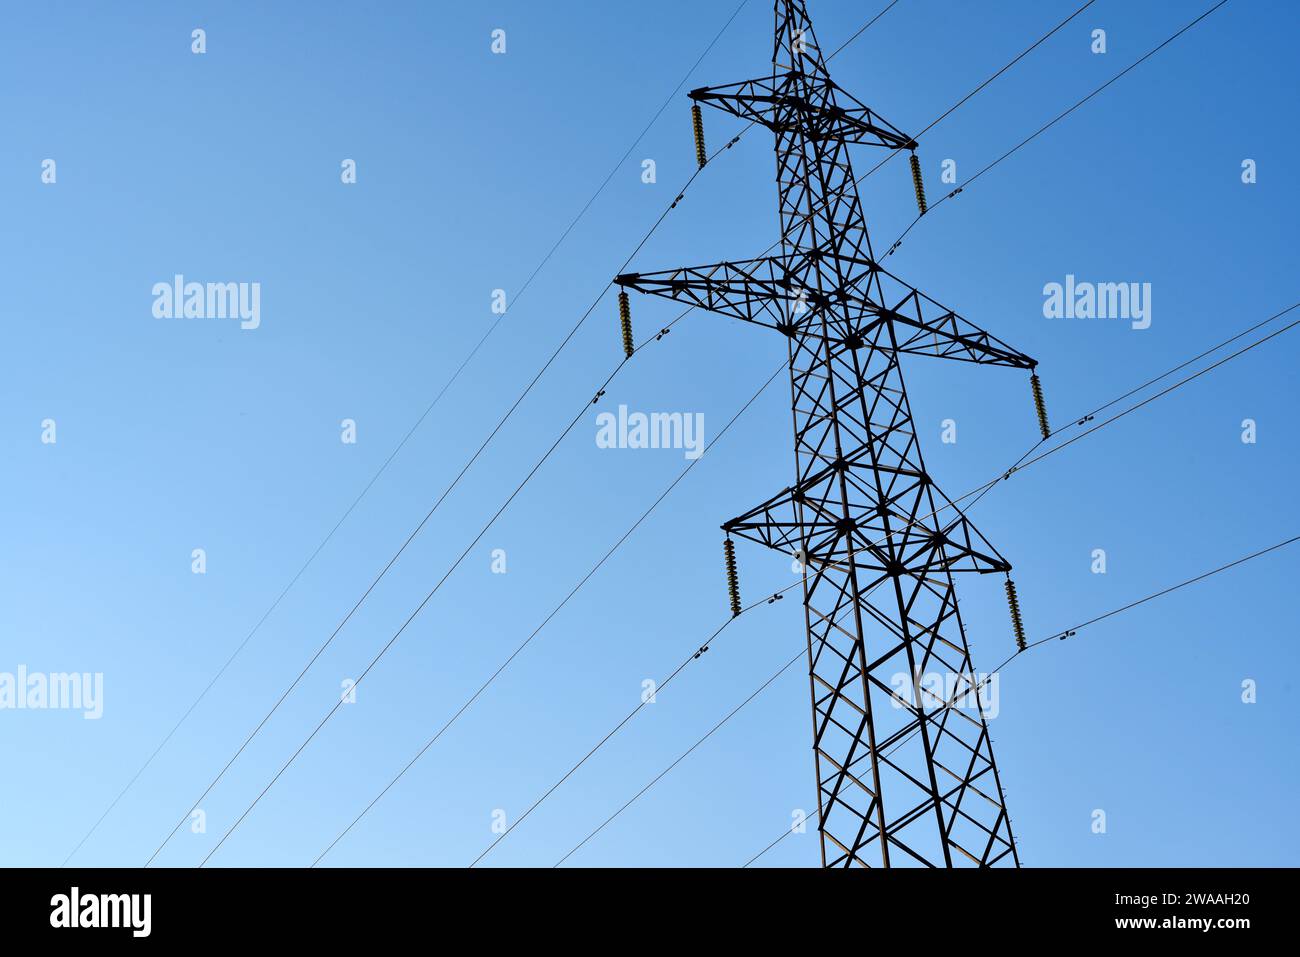 High-voltage power lines against a blue sky background. Towers for the transmission of electricity. Power transmission lines. Stock Photo